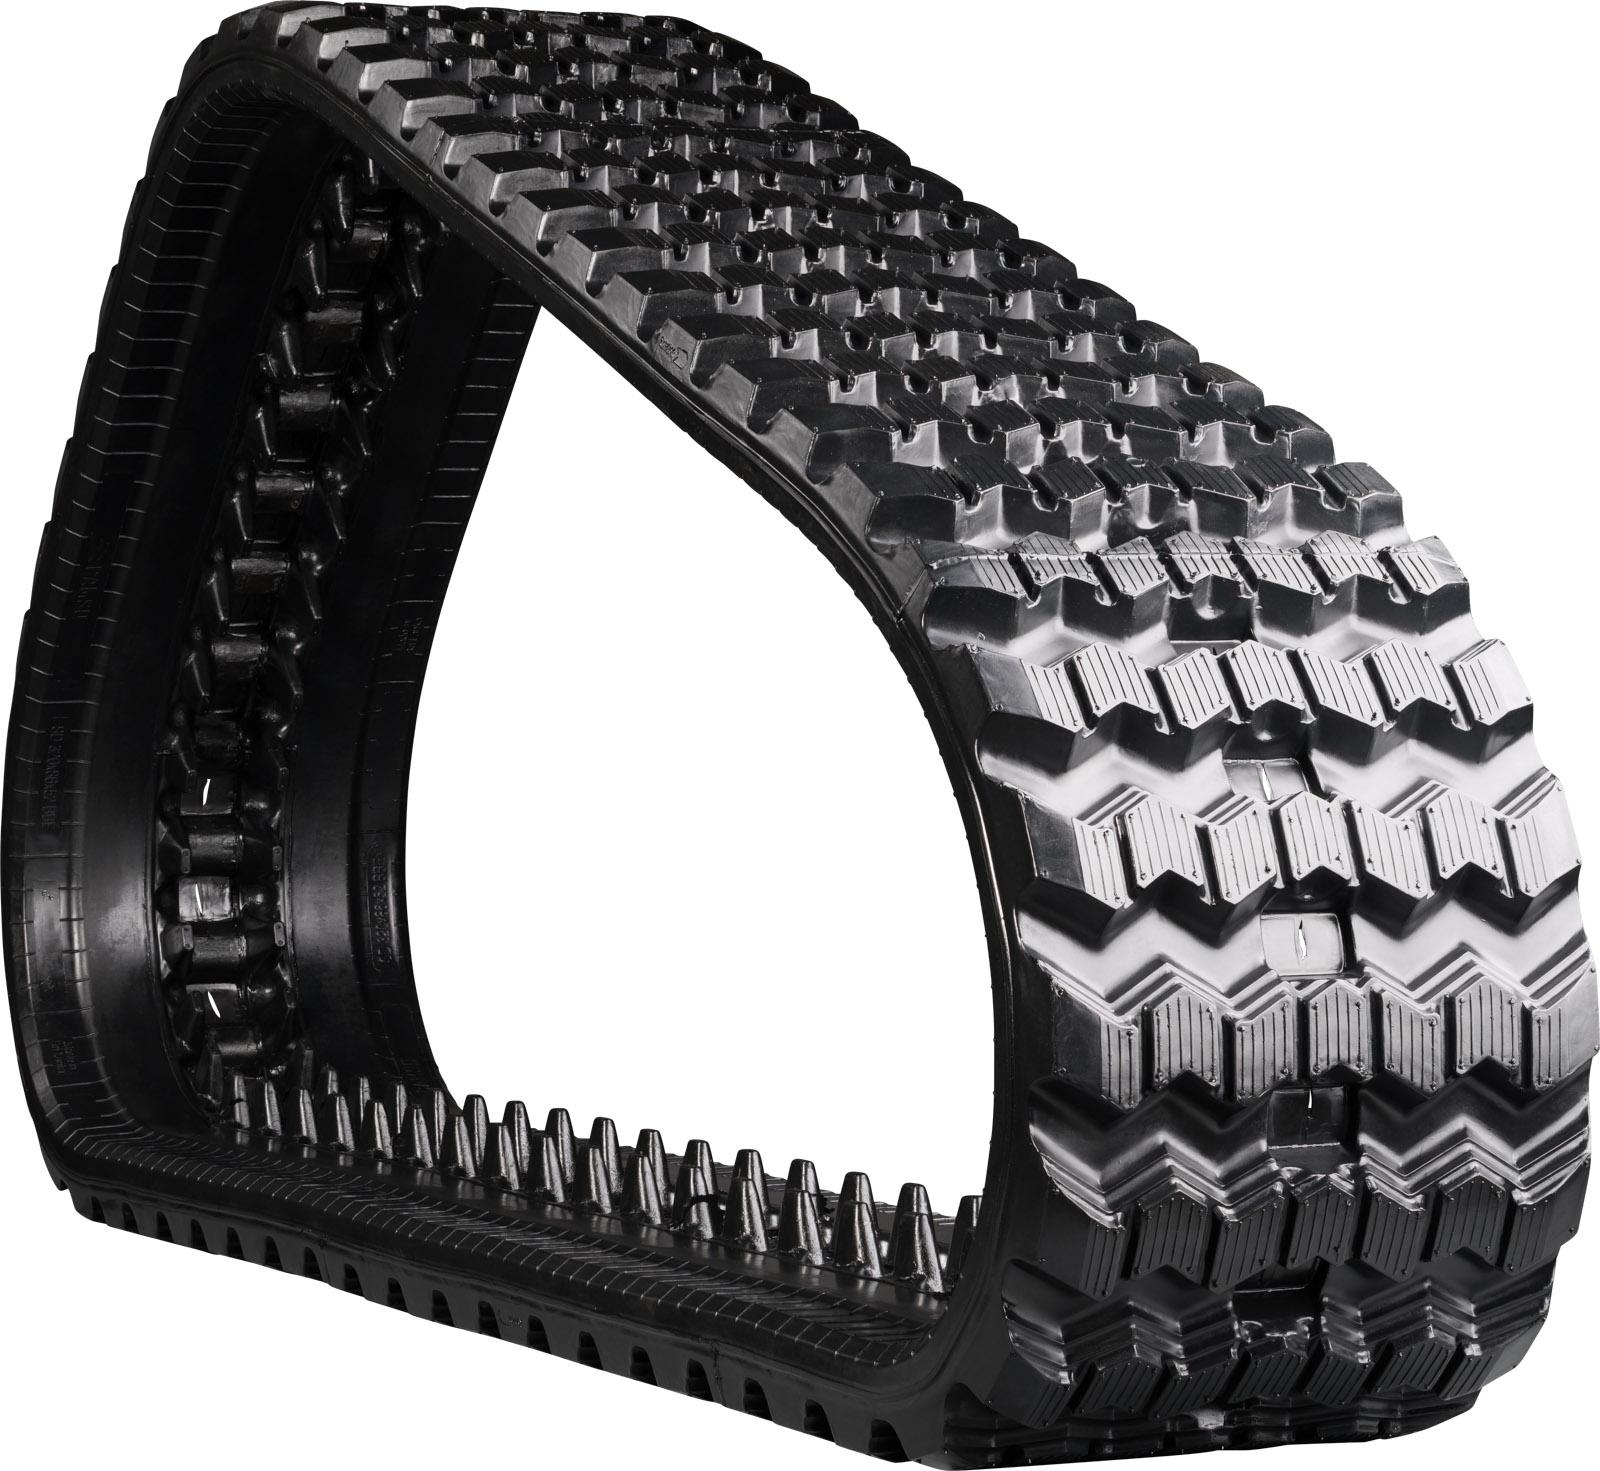 set of 2 13" camso heavy duty sawtooth pattern rubber track (320x86bx48)